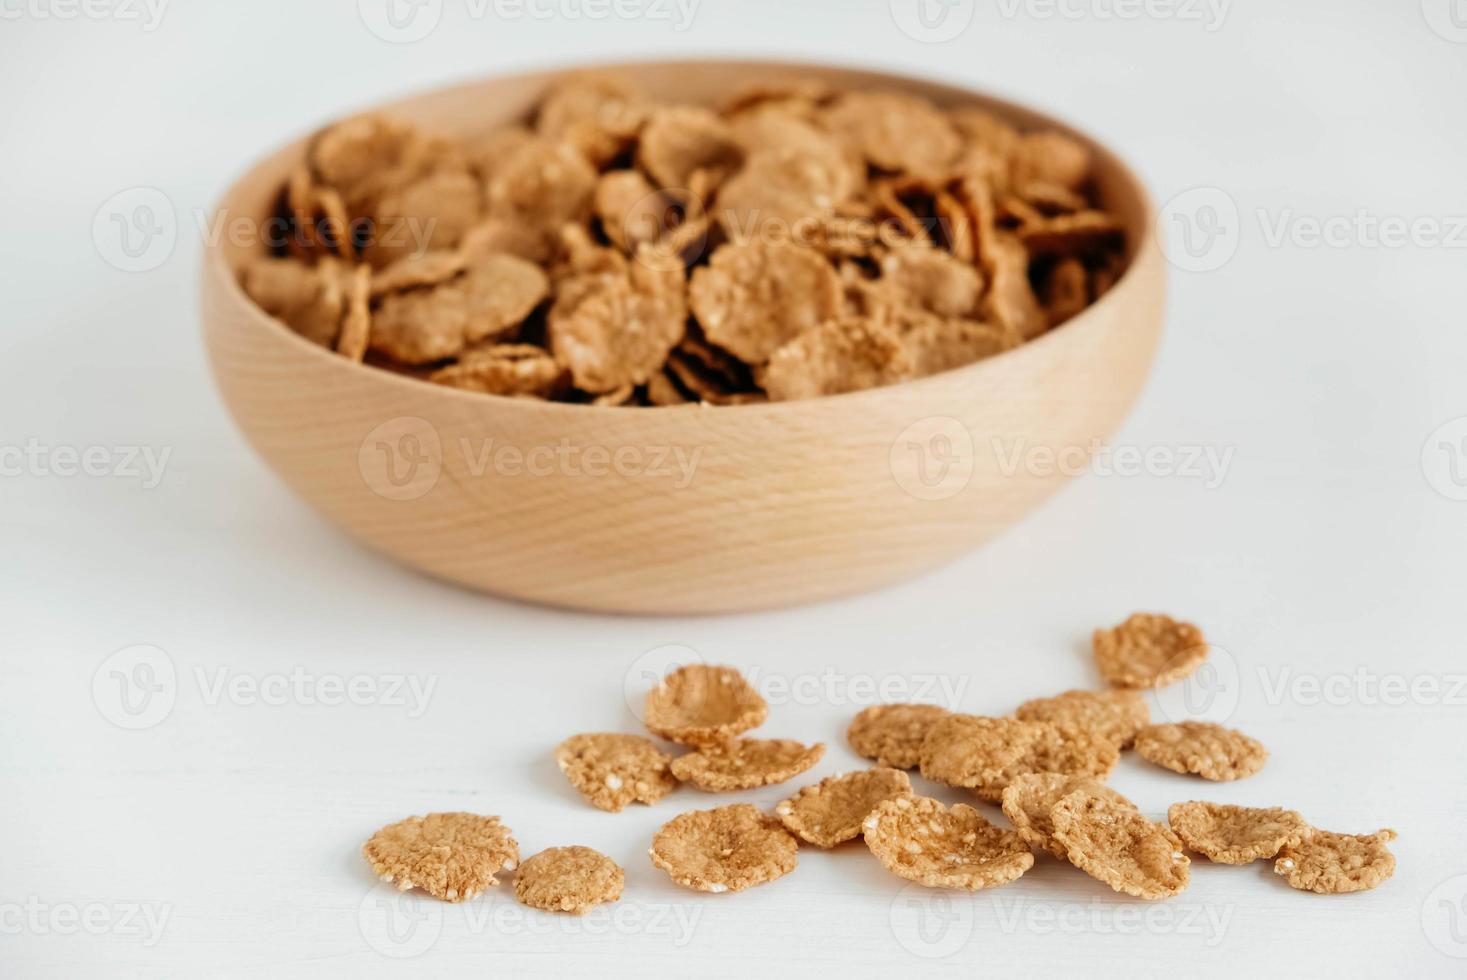 Crispy healthy dry cereal flakes in a wooden bowl on white background photo